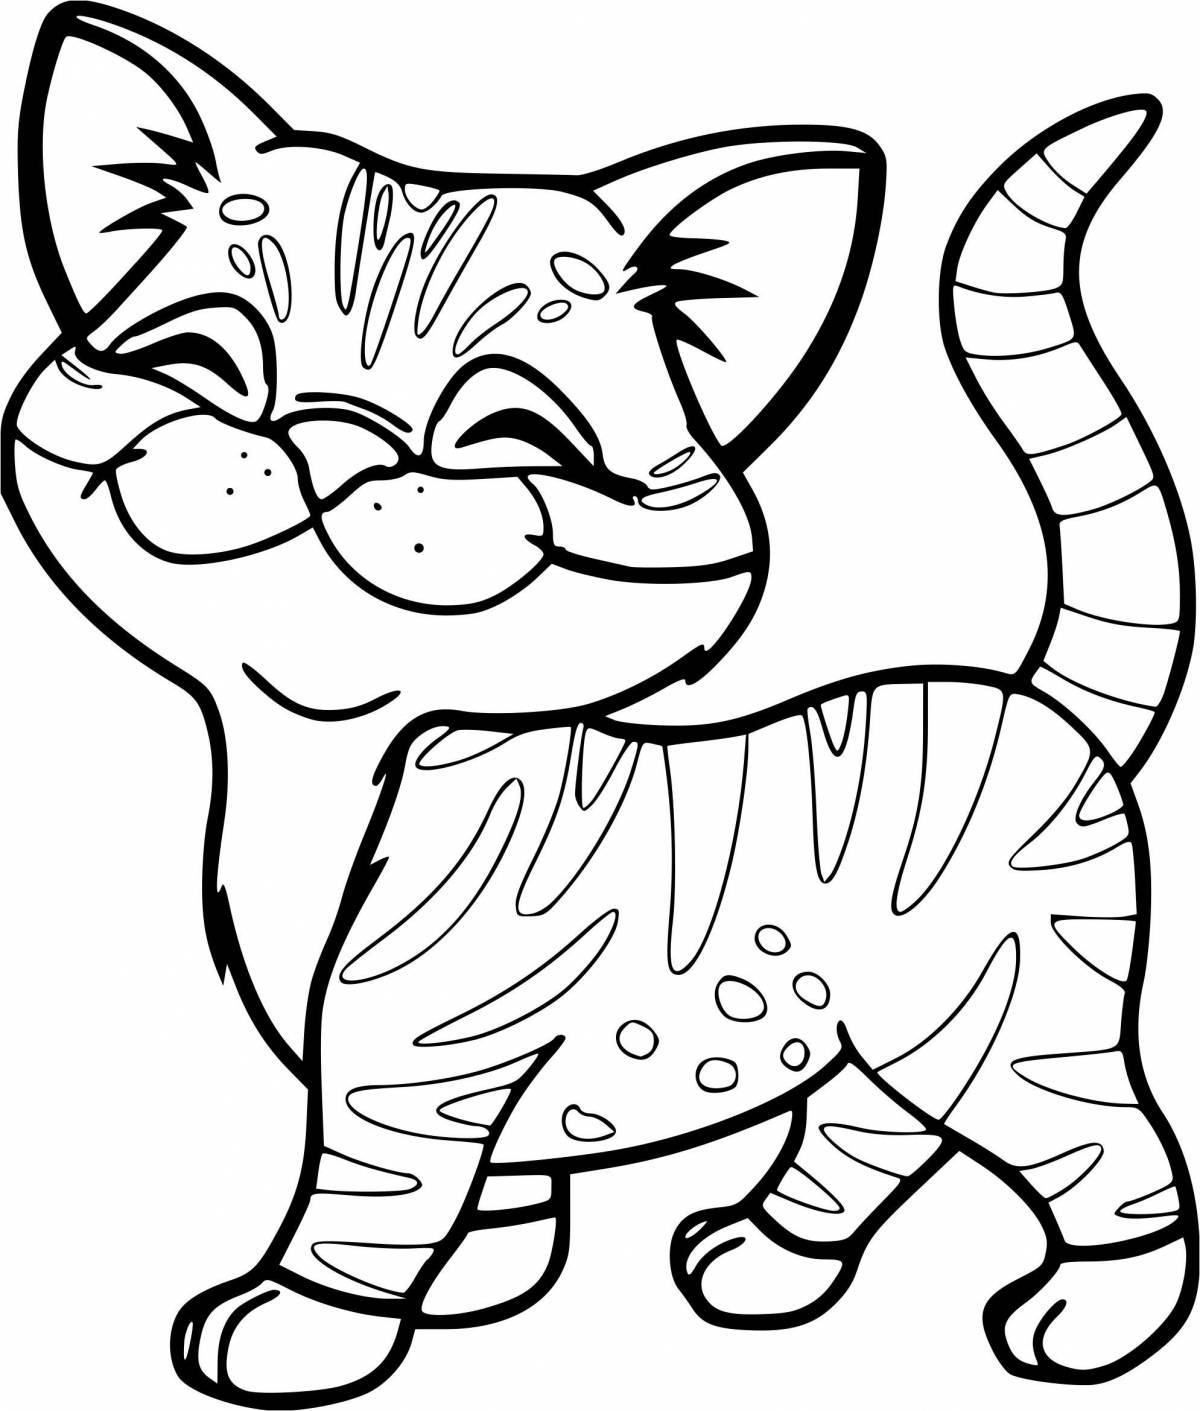 Fluffy kitten coloring book